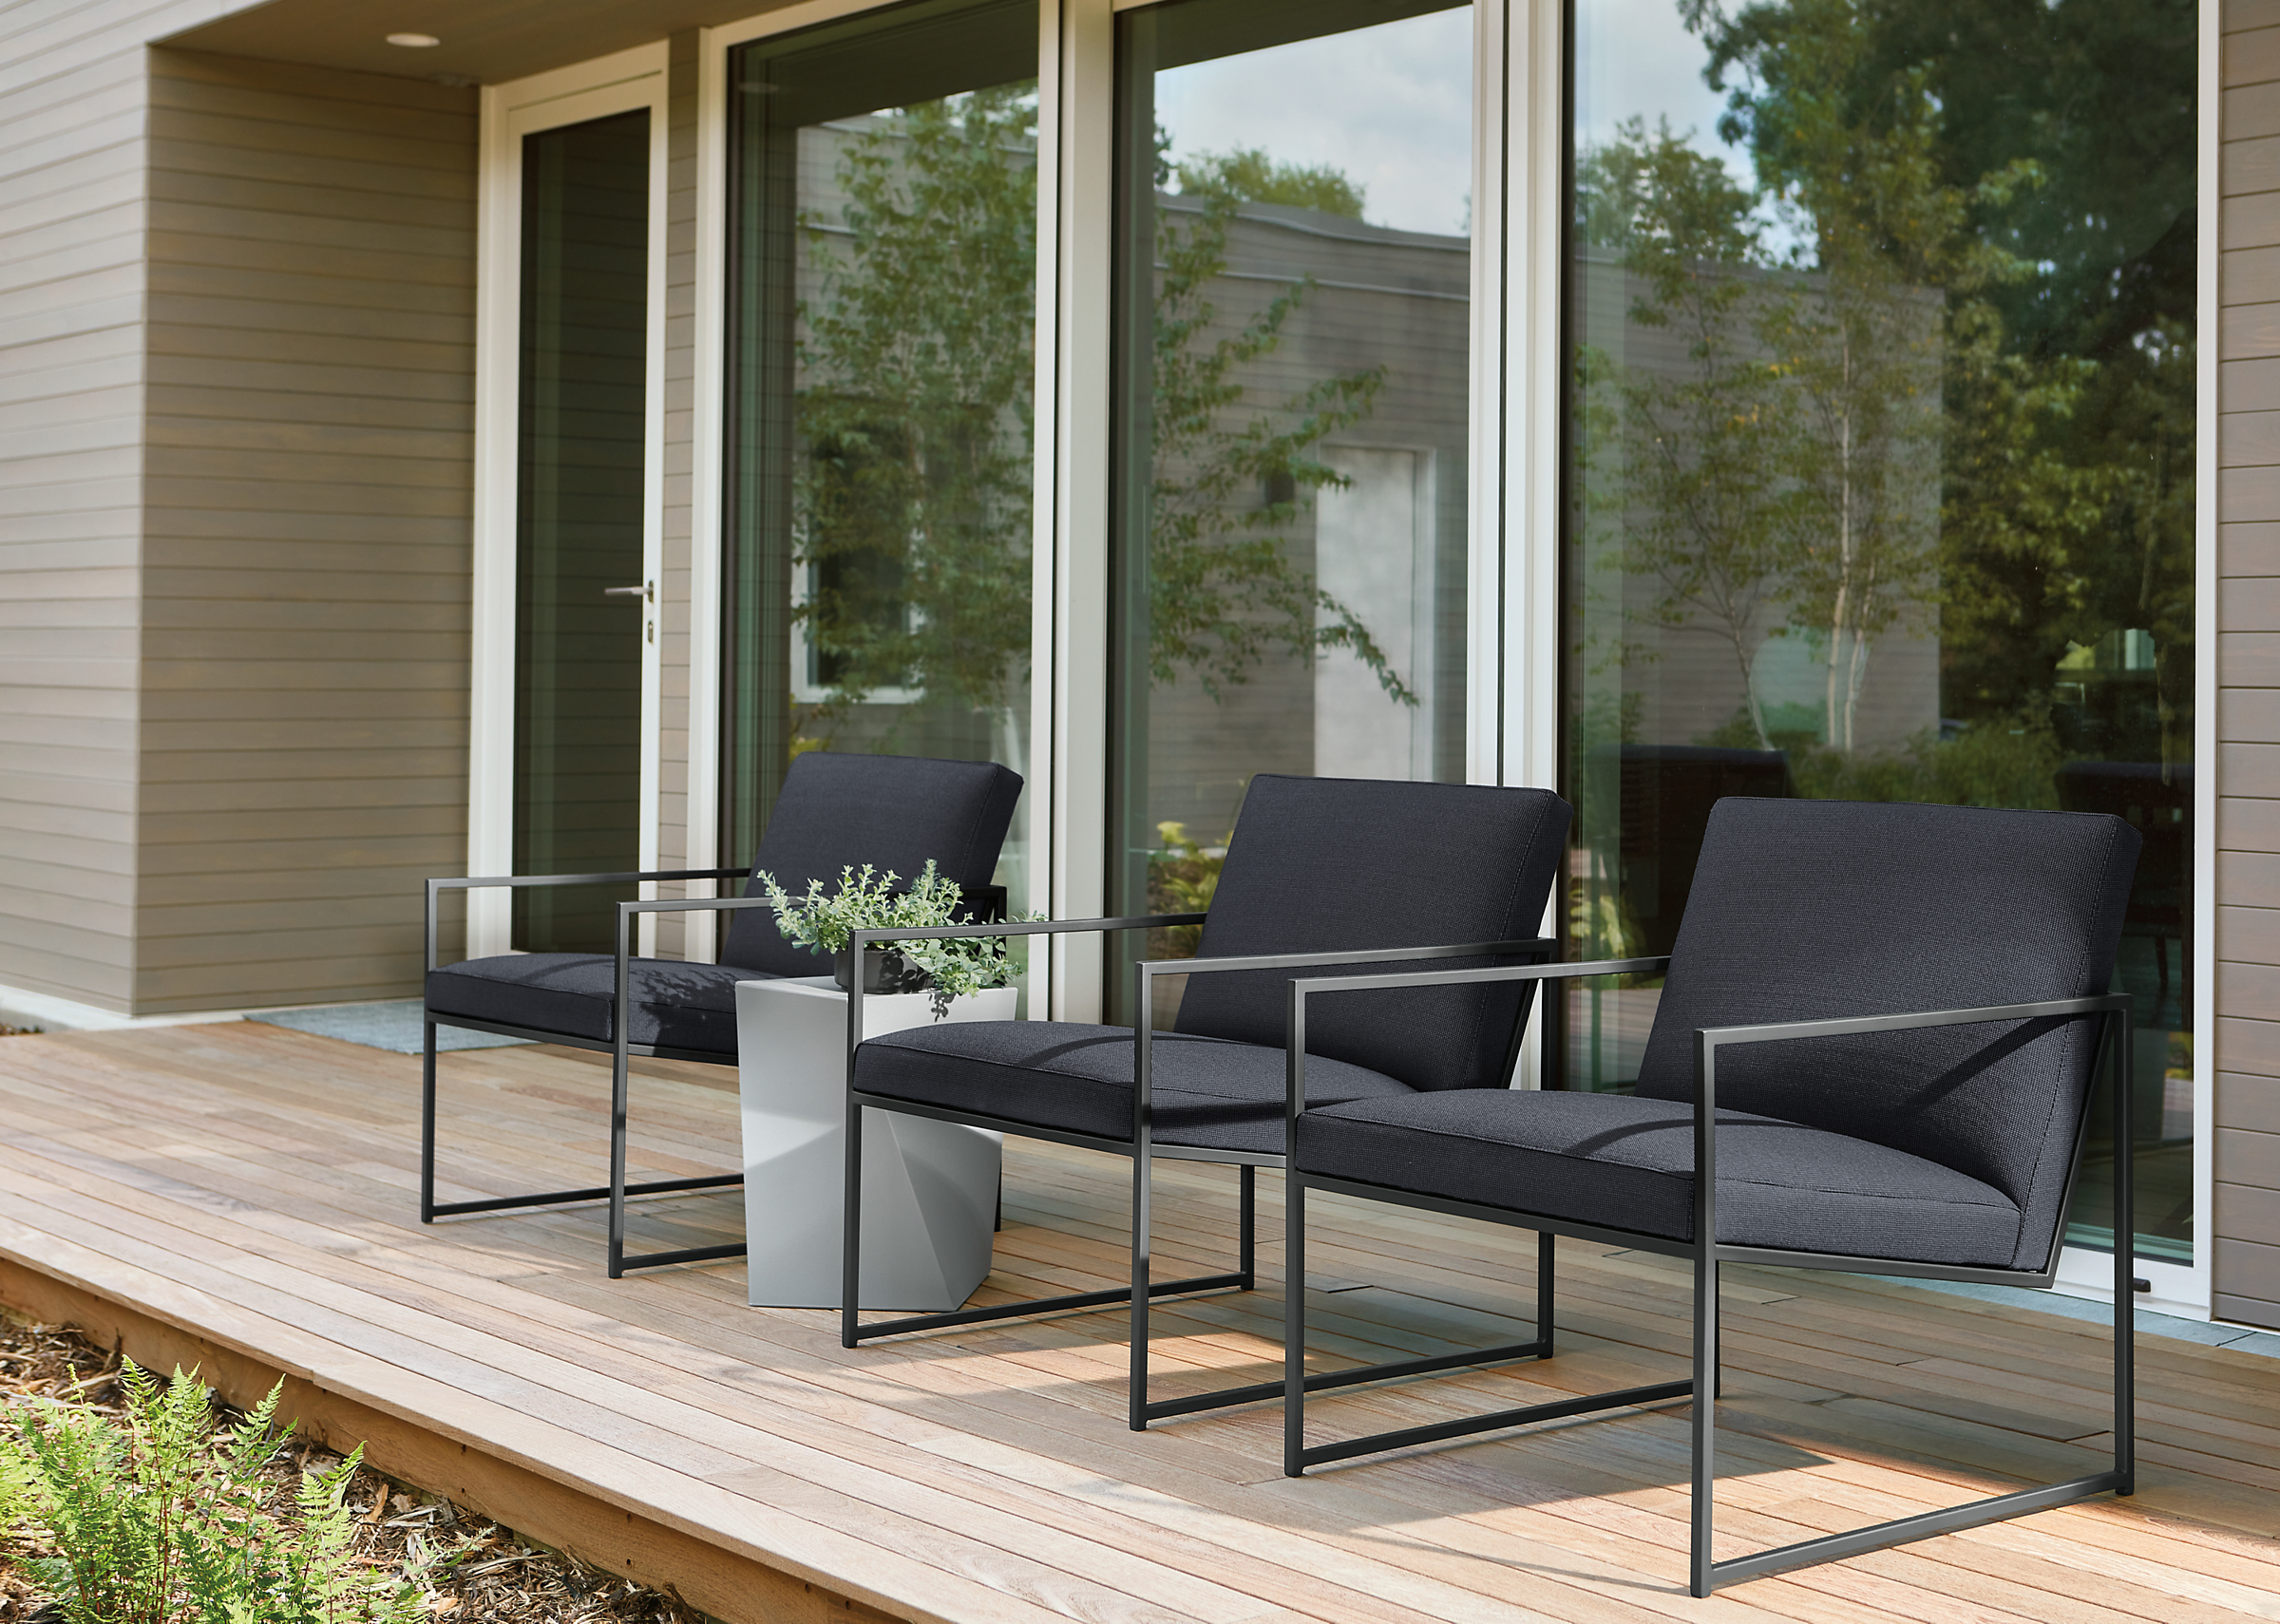 Outdoor space with 3 Nouvel chairs in Niro Charcoal fabric.